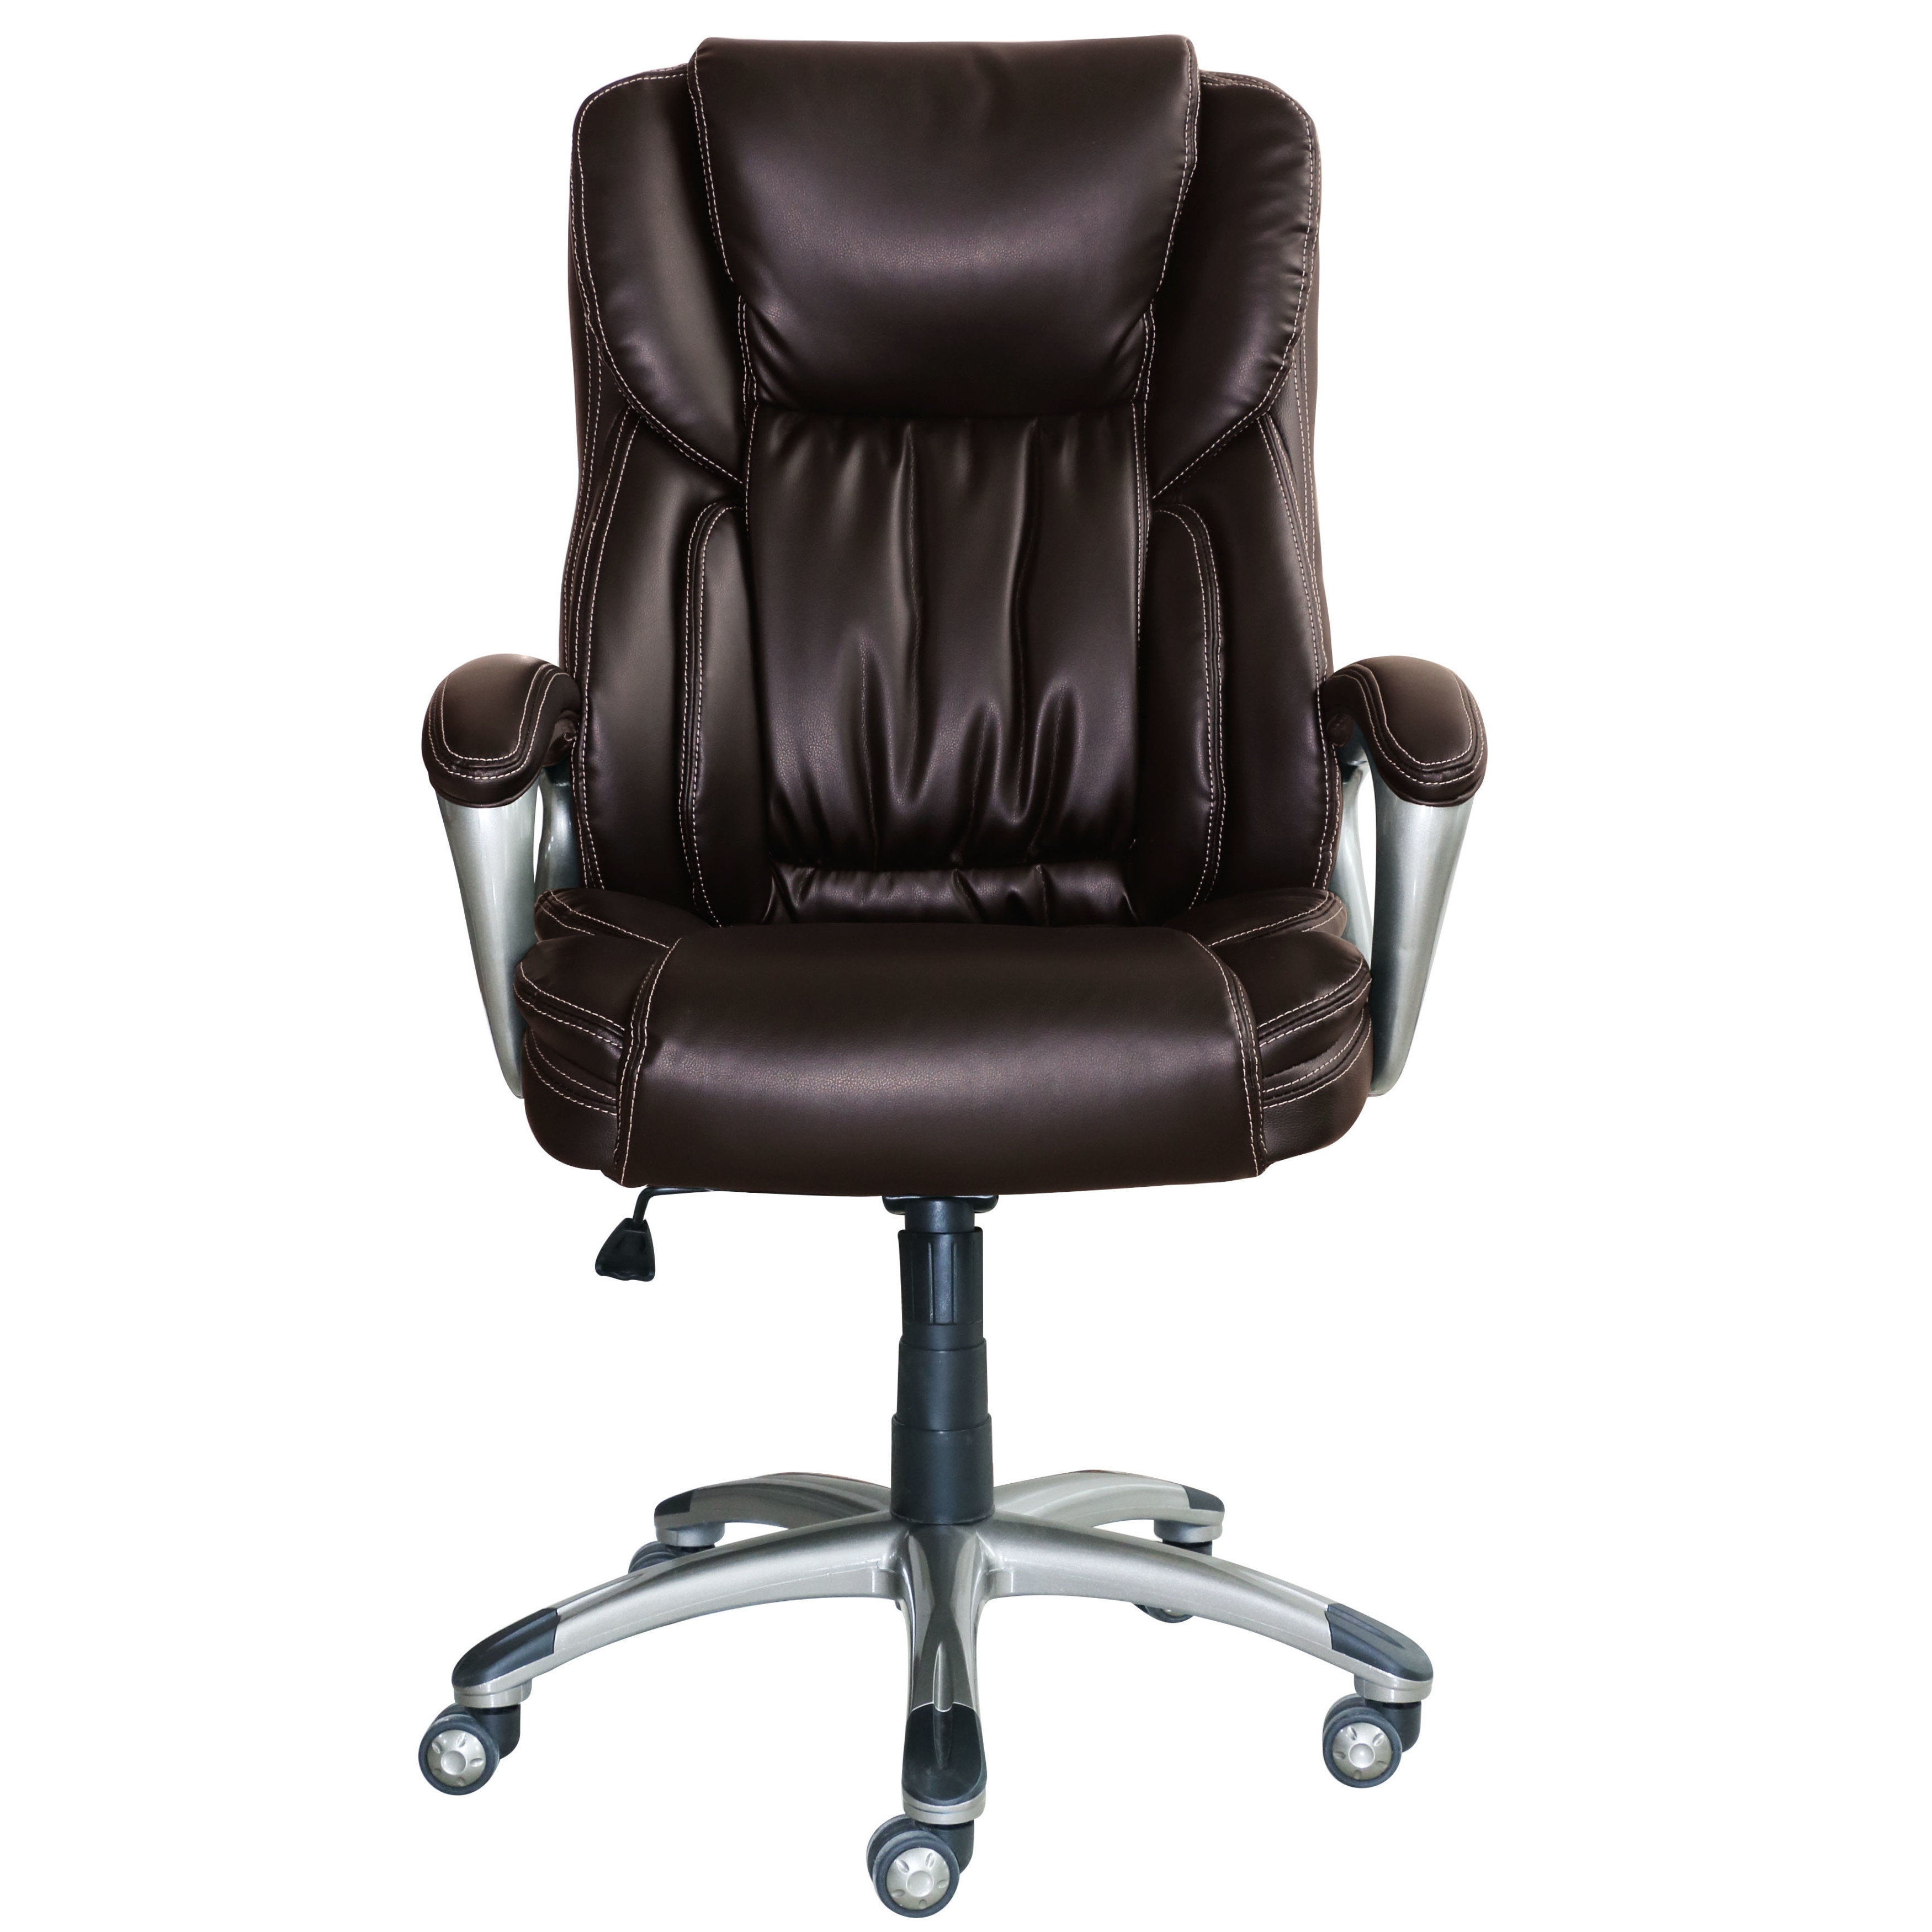 Shop Serta Works Bonded Leather Executive Office Chair On Sale